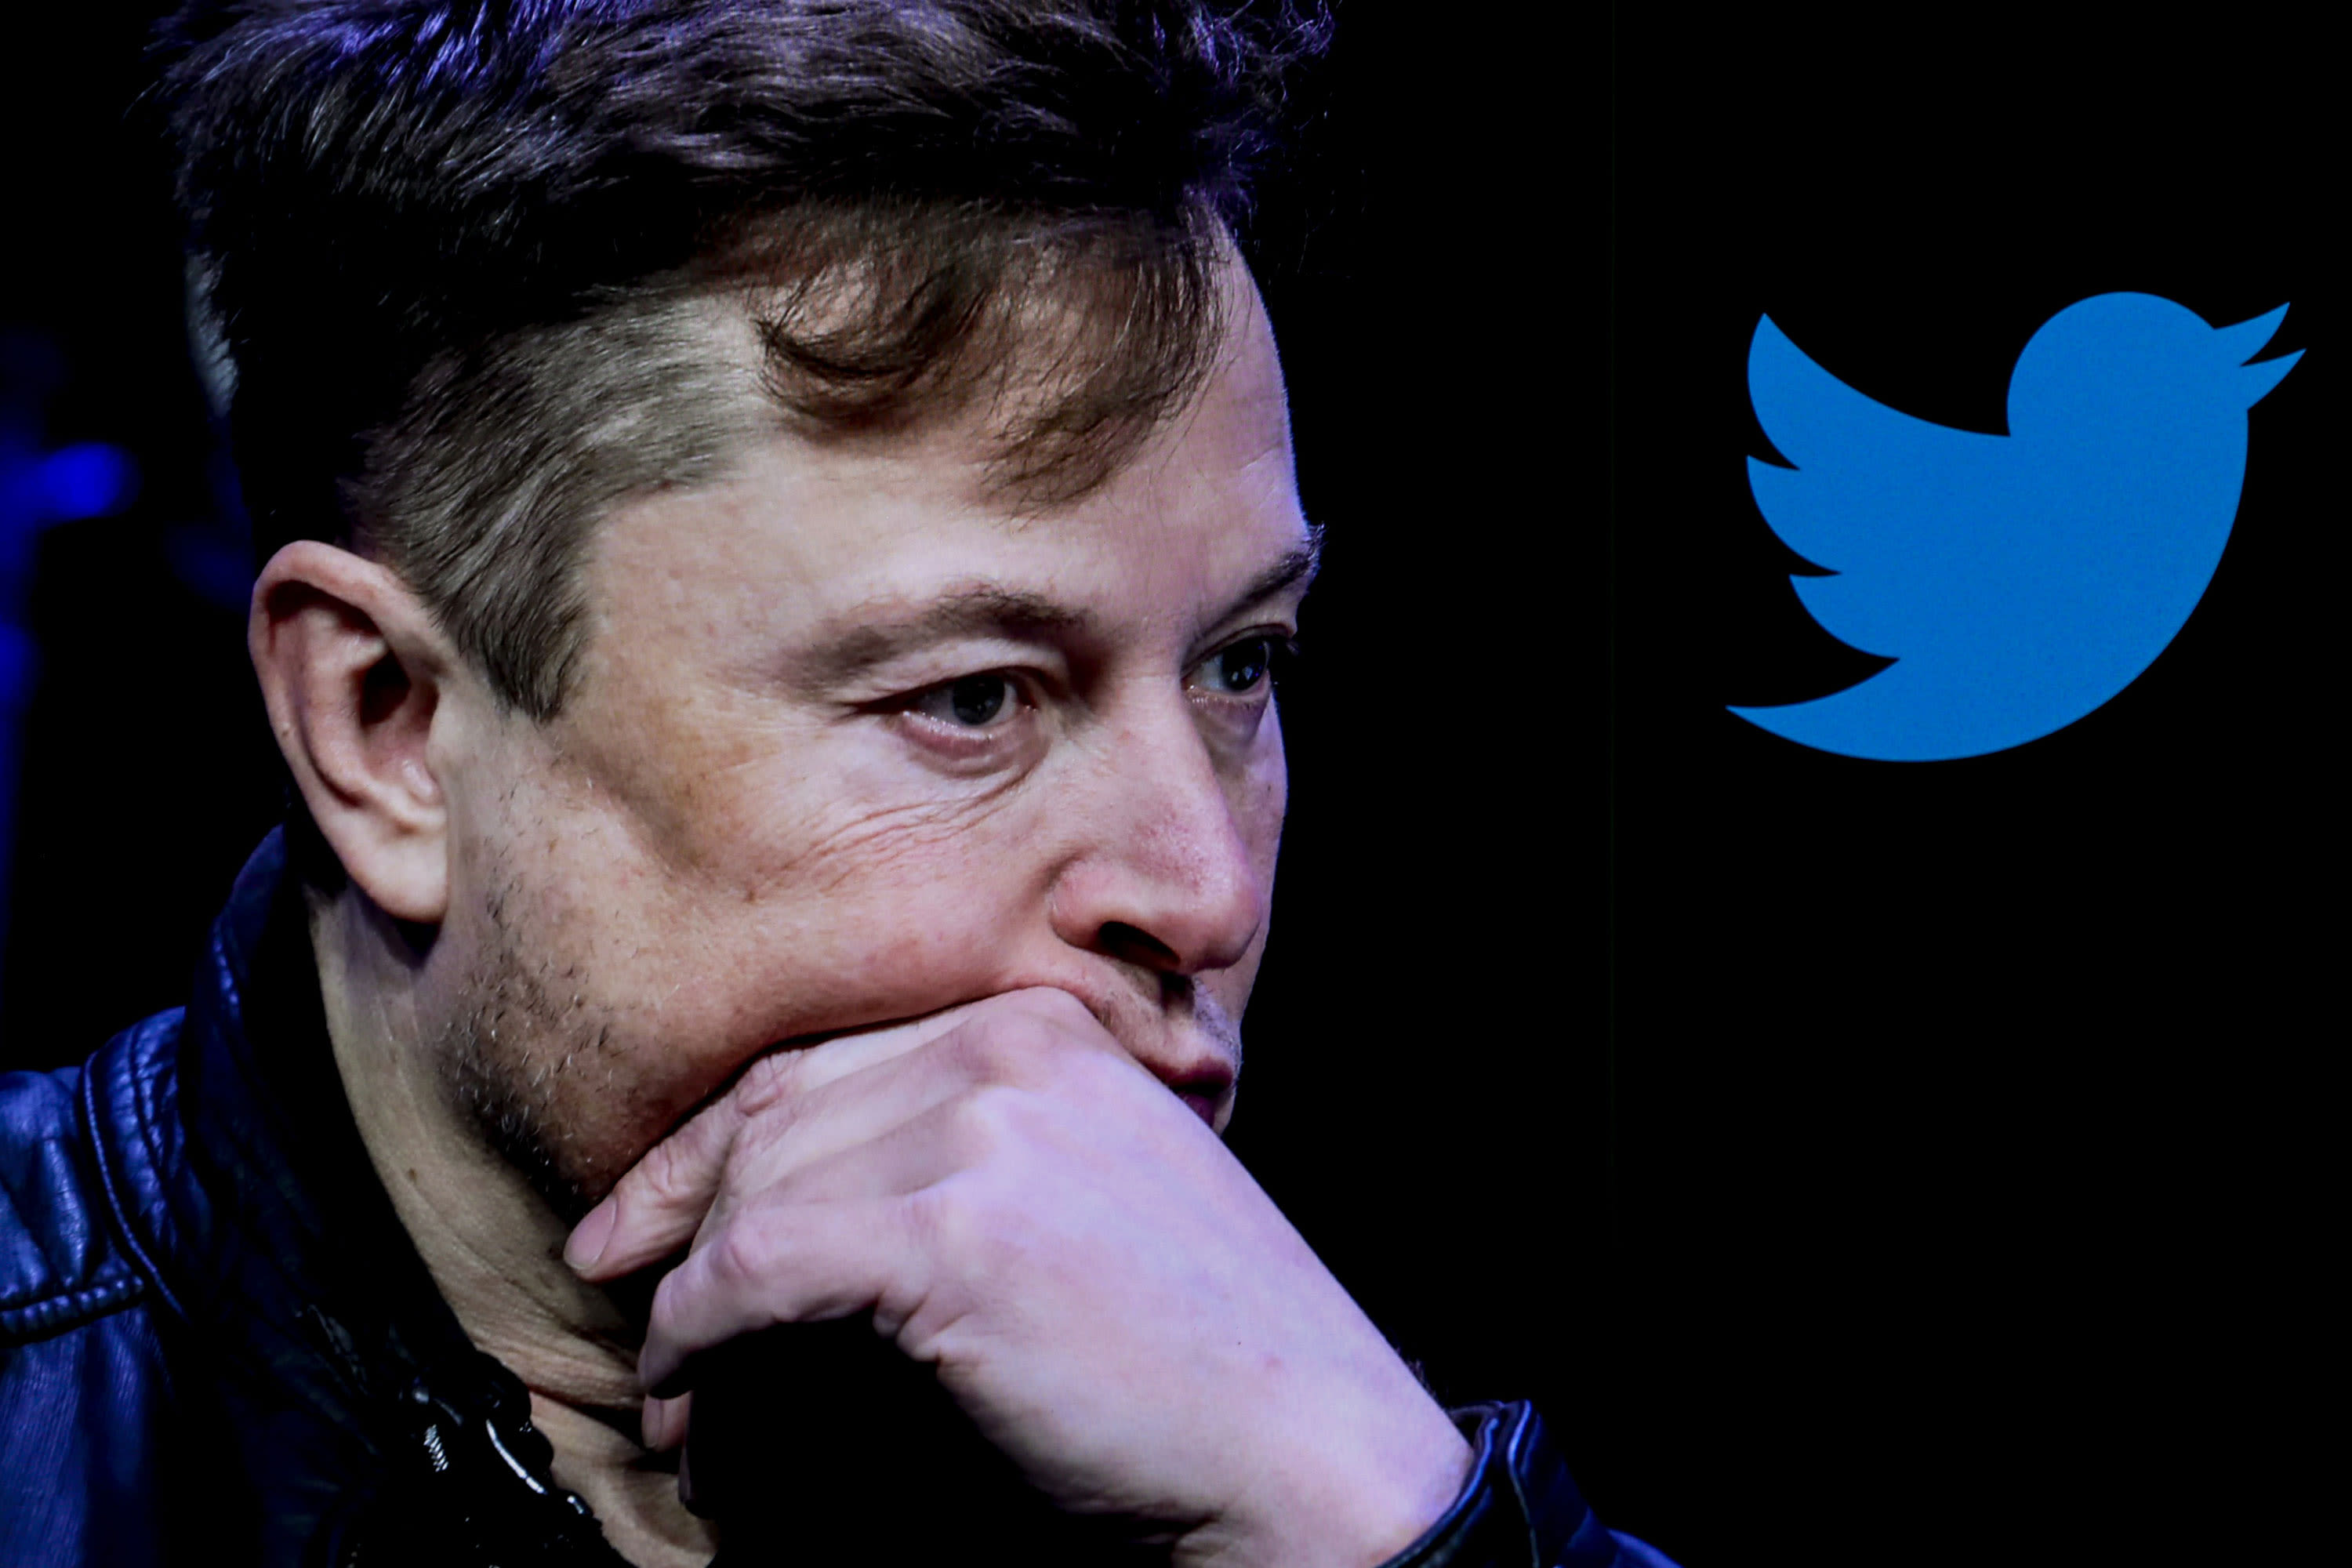 Elon Musk Polls Twitter on Whether He Should Step Down. Users Vote Yes.